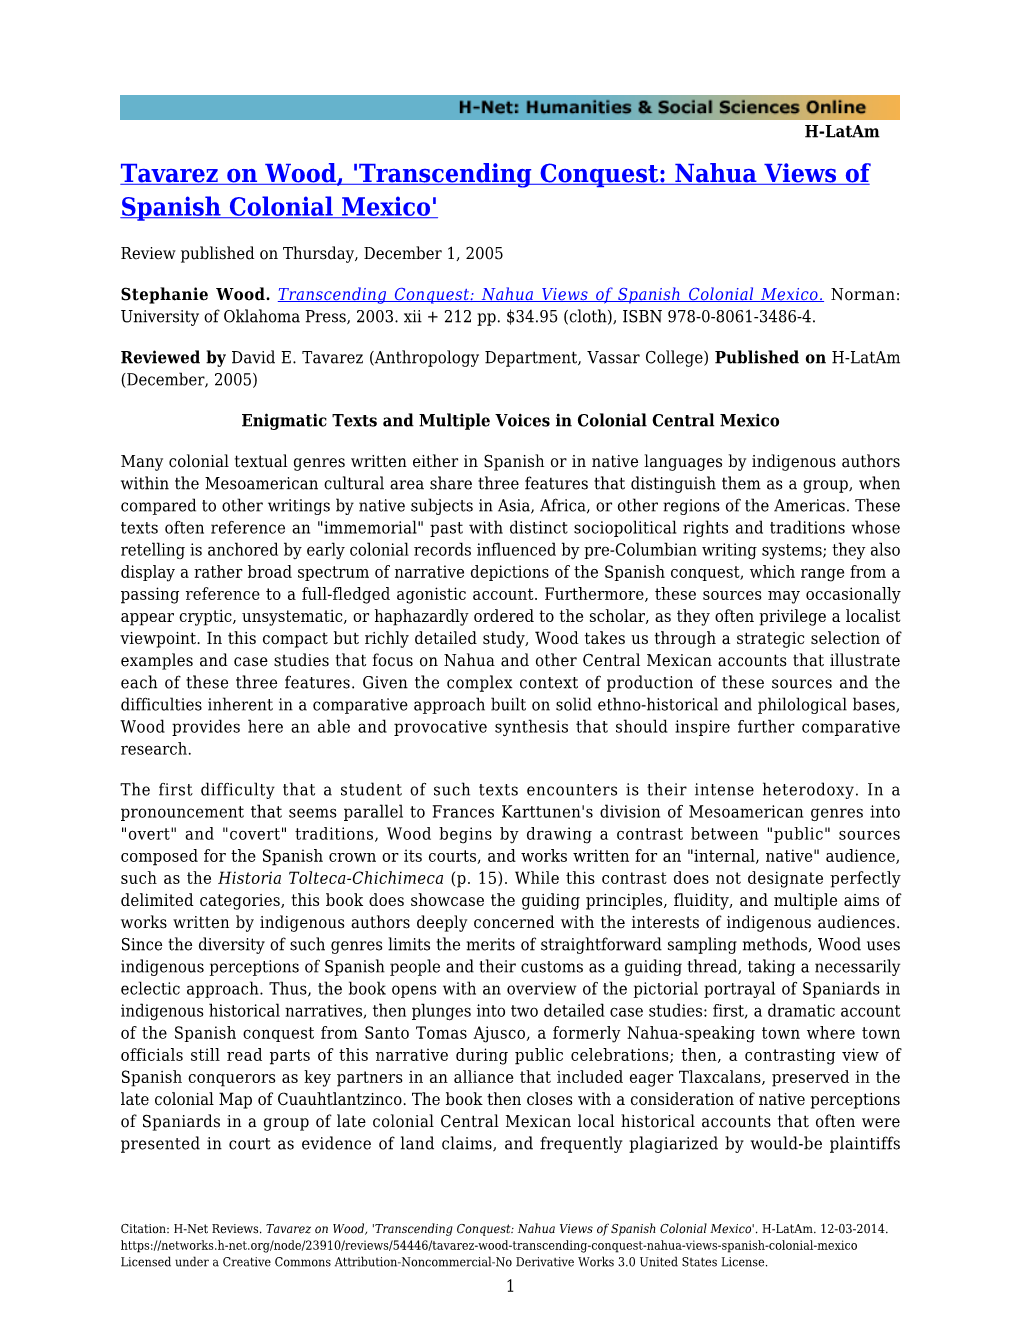 Transcending Conquest: Nahua Views of Spanish Colonial Mexico'